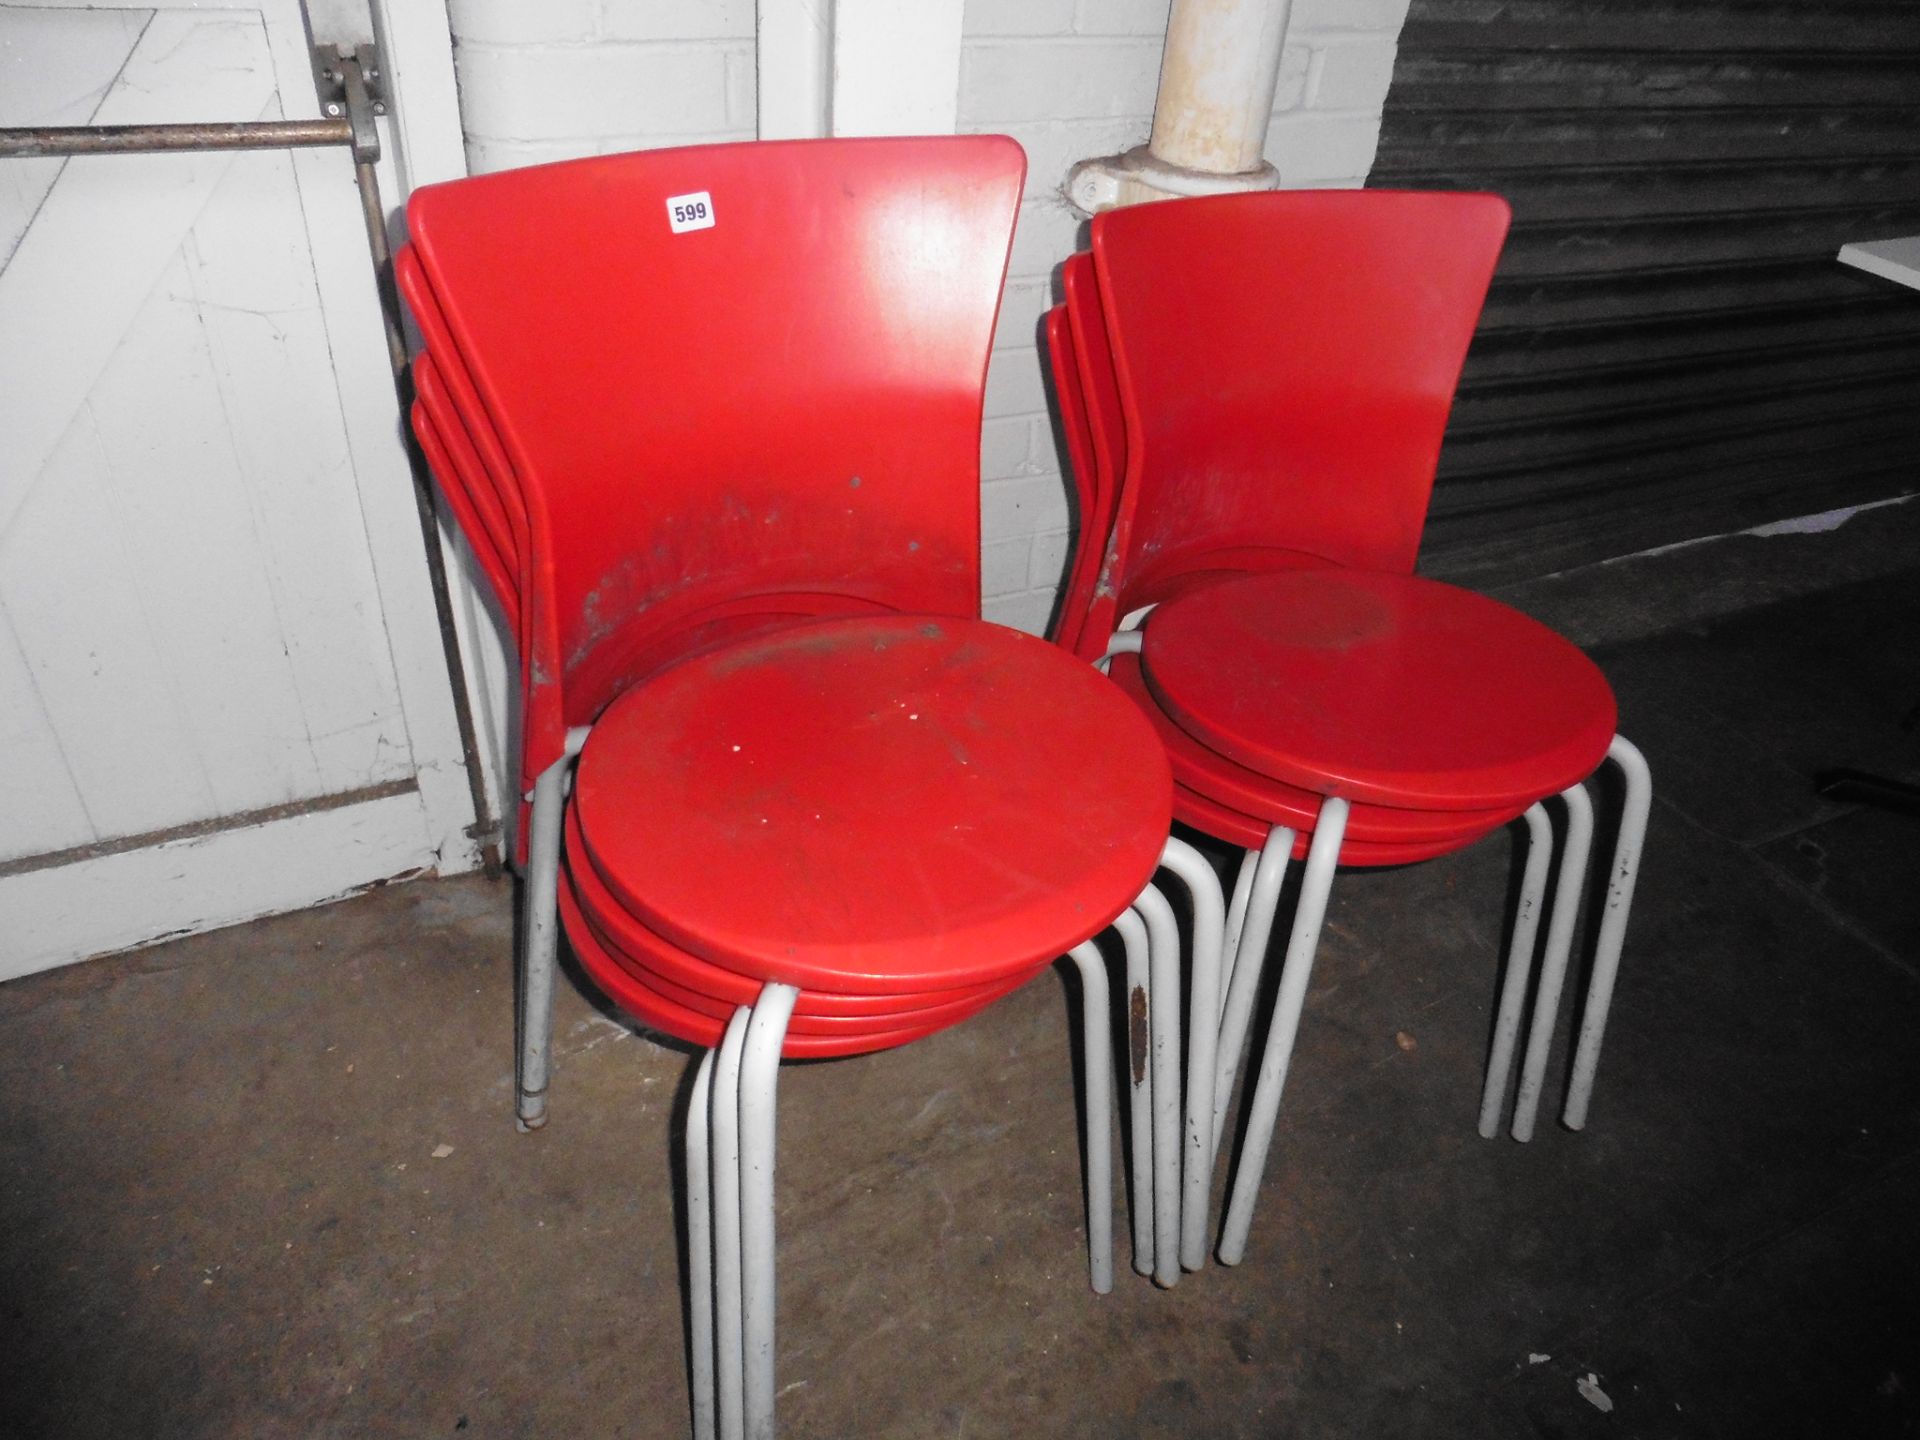 Stack of 7 Olaf Von Bohr designer stacking chairs, in red